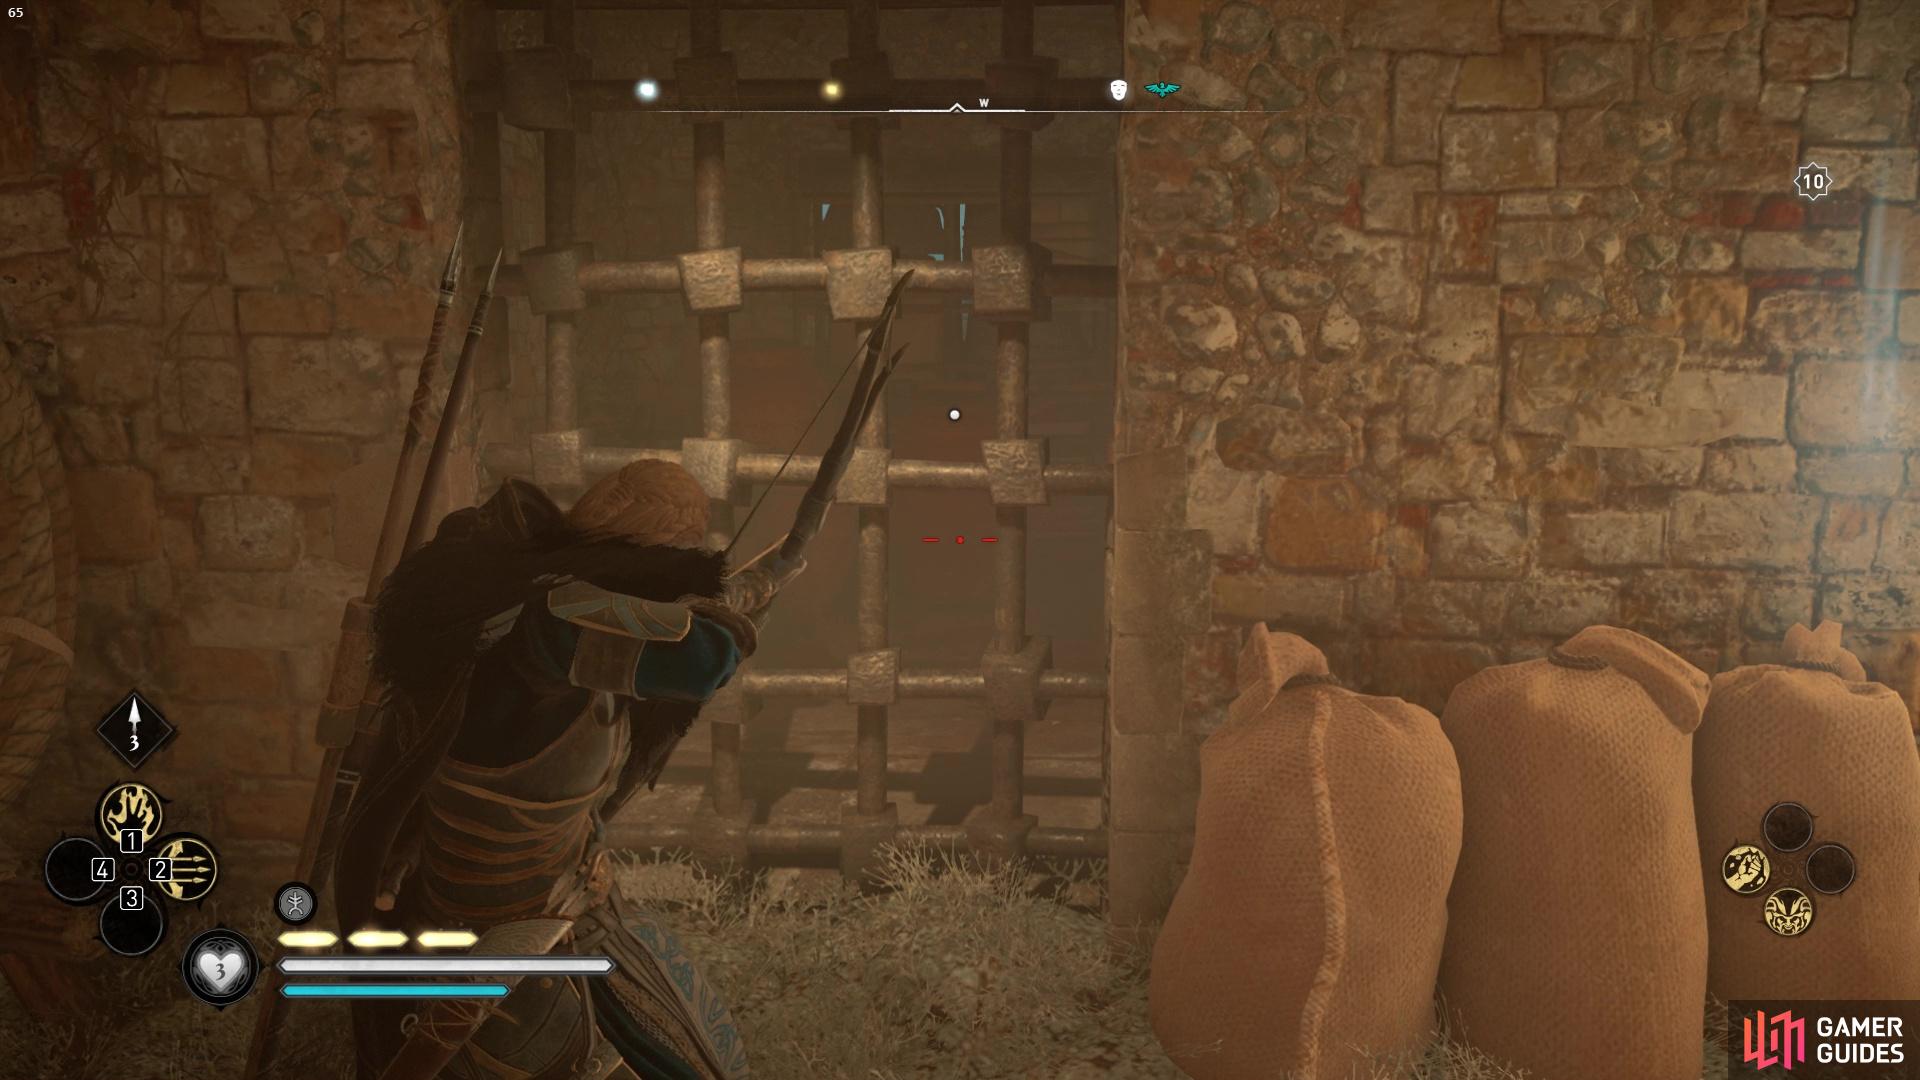 but to get to it you'll need to shoot the pots that are blocking the moveable barricade from shifting.